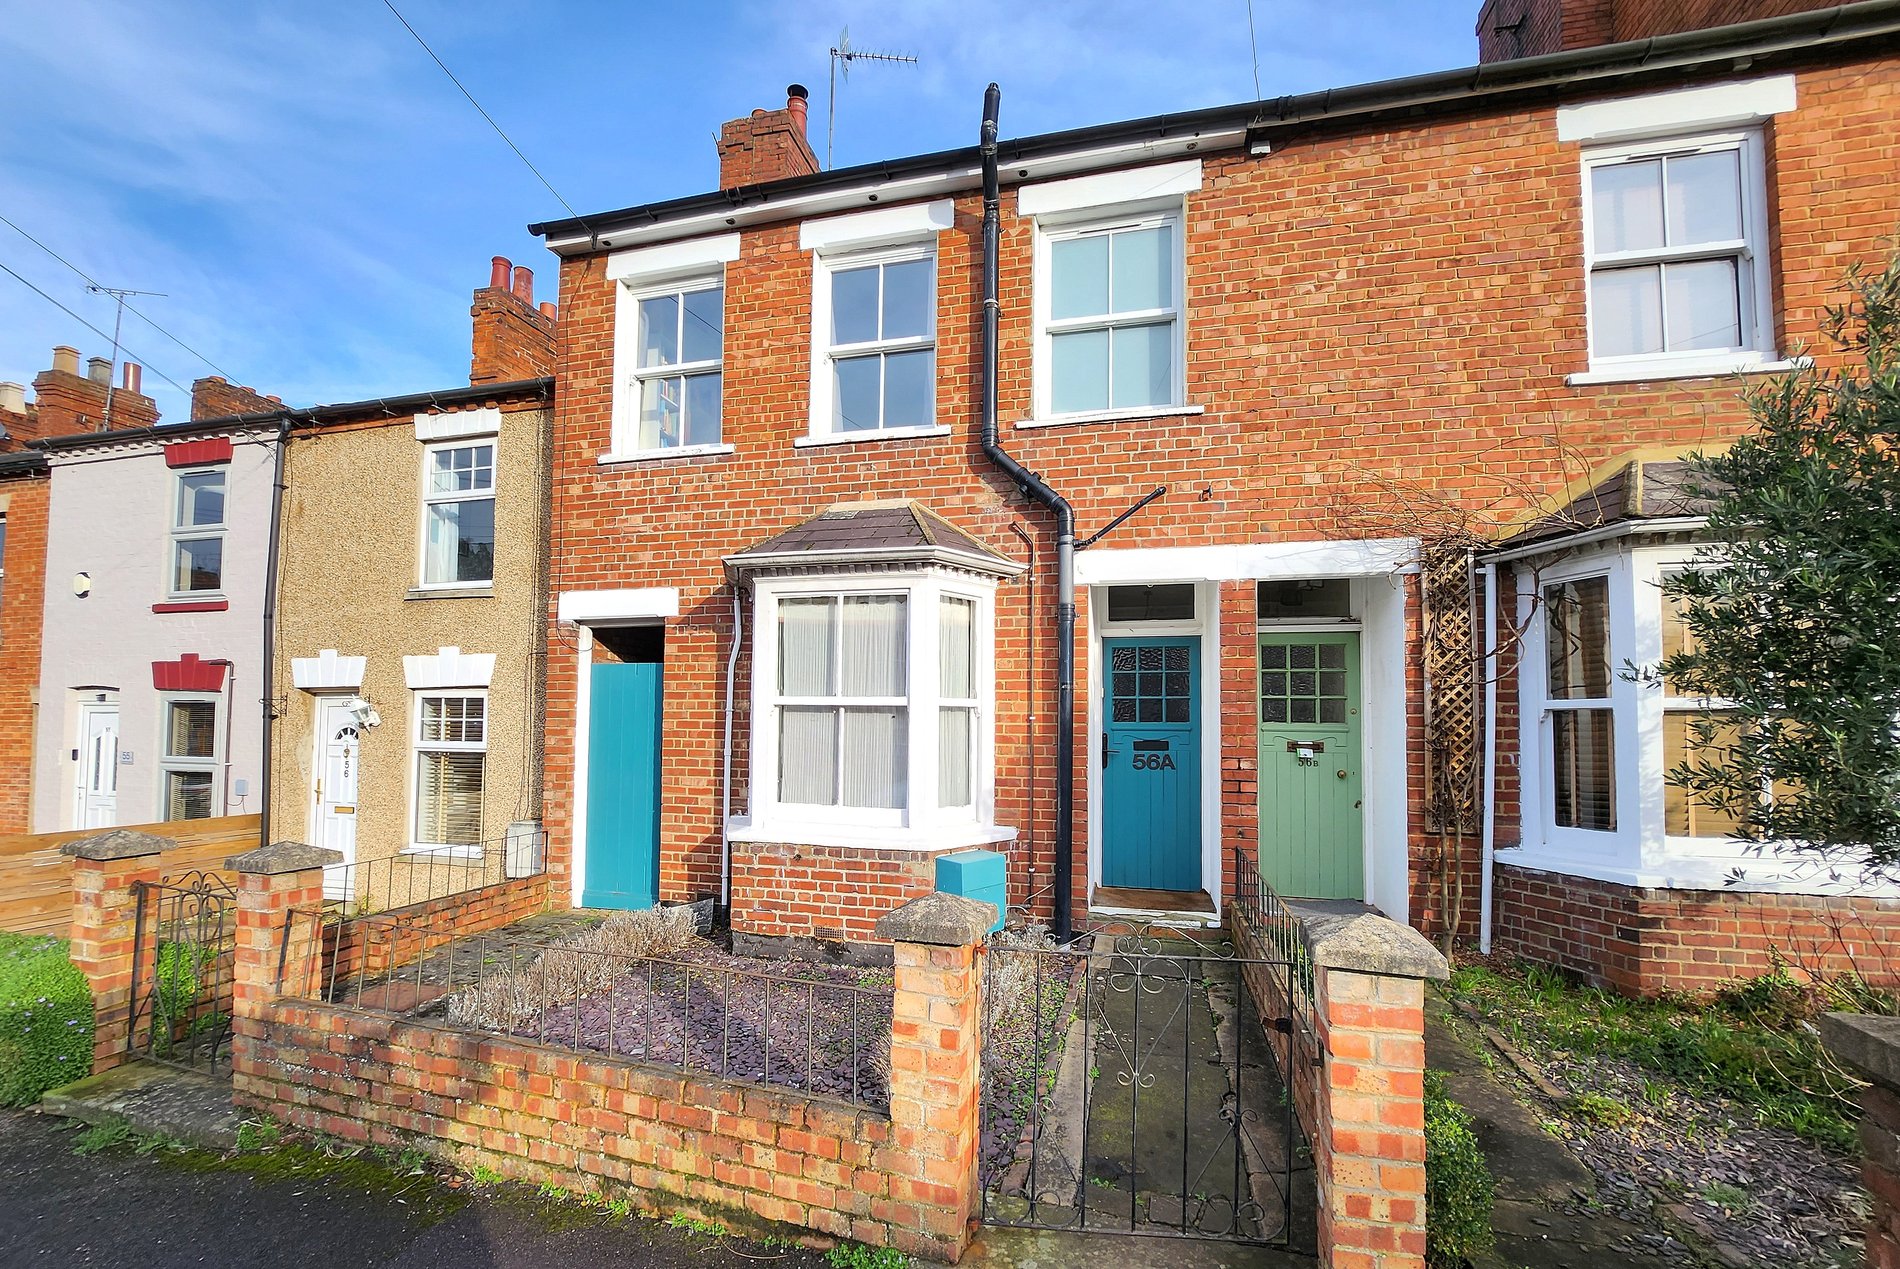 3 bed terraced house for sale in Centre Street, Banbury - Property Image 1